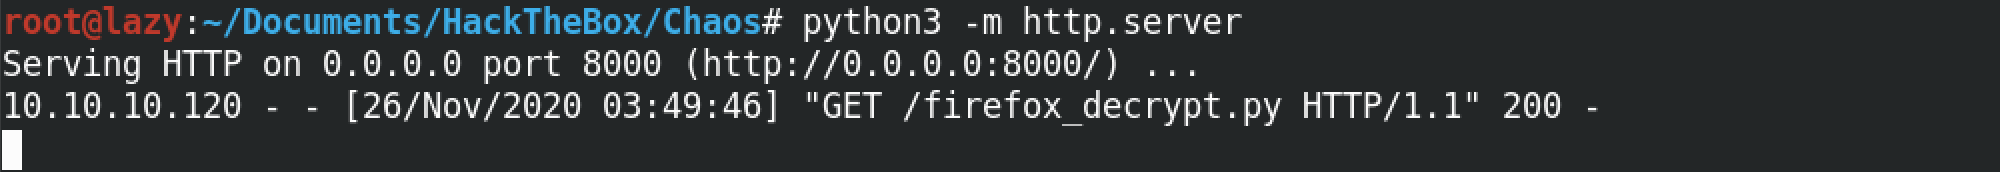 Successful hit on our Python web server.